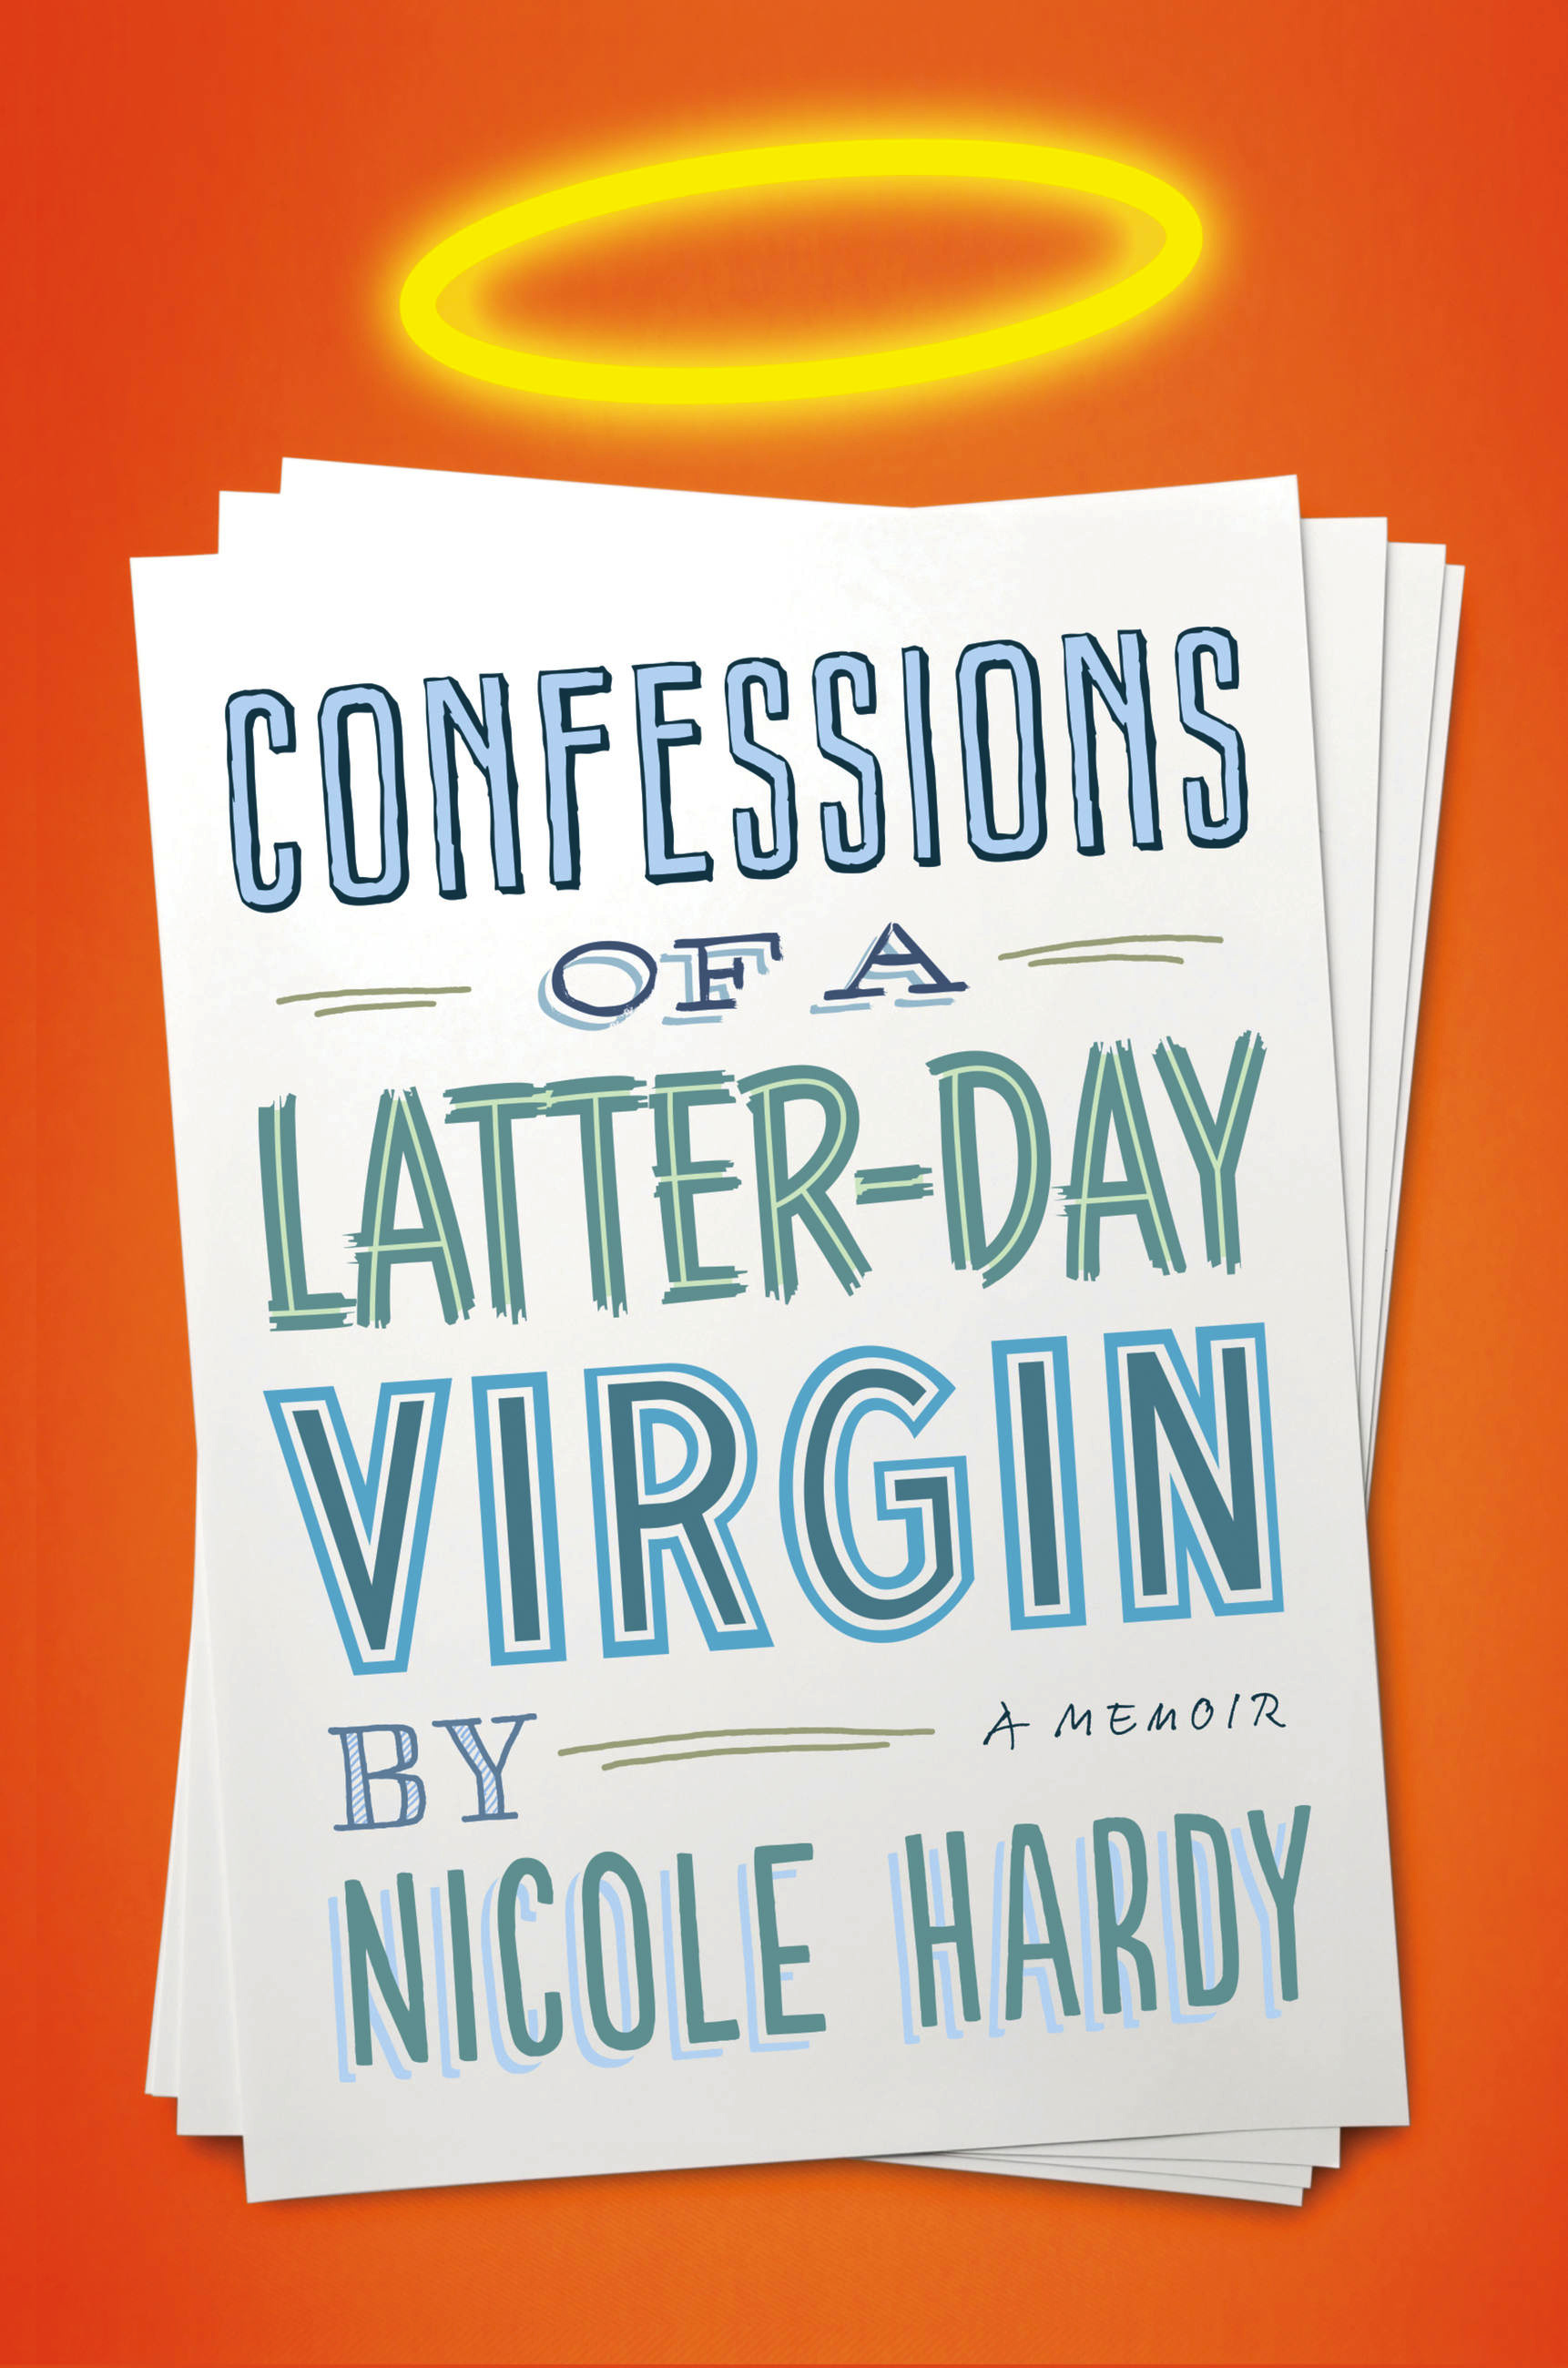 Teen Girl Rubbing - Confessions of a Latter-day Virgin by Nicole Hardy | Hachette Book Group